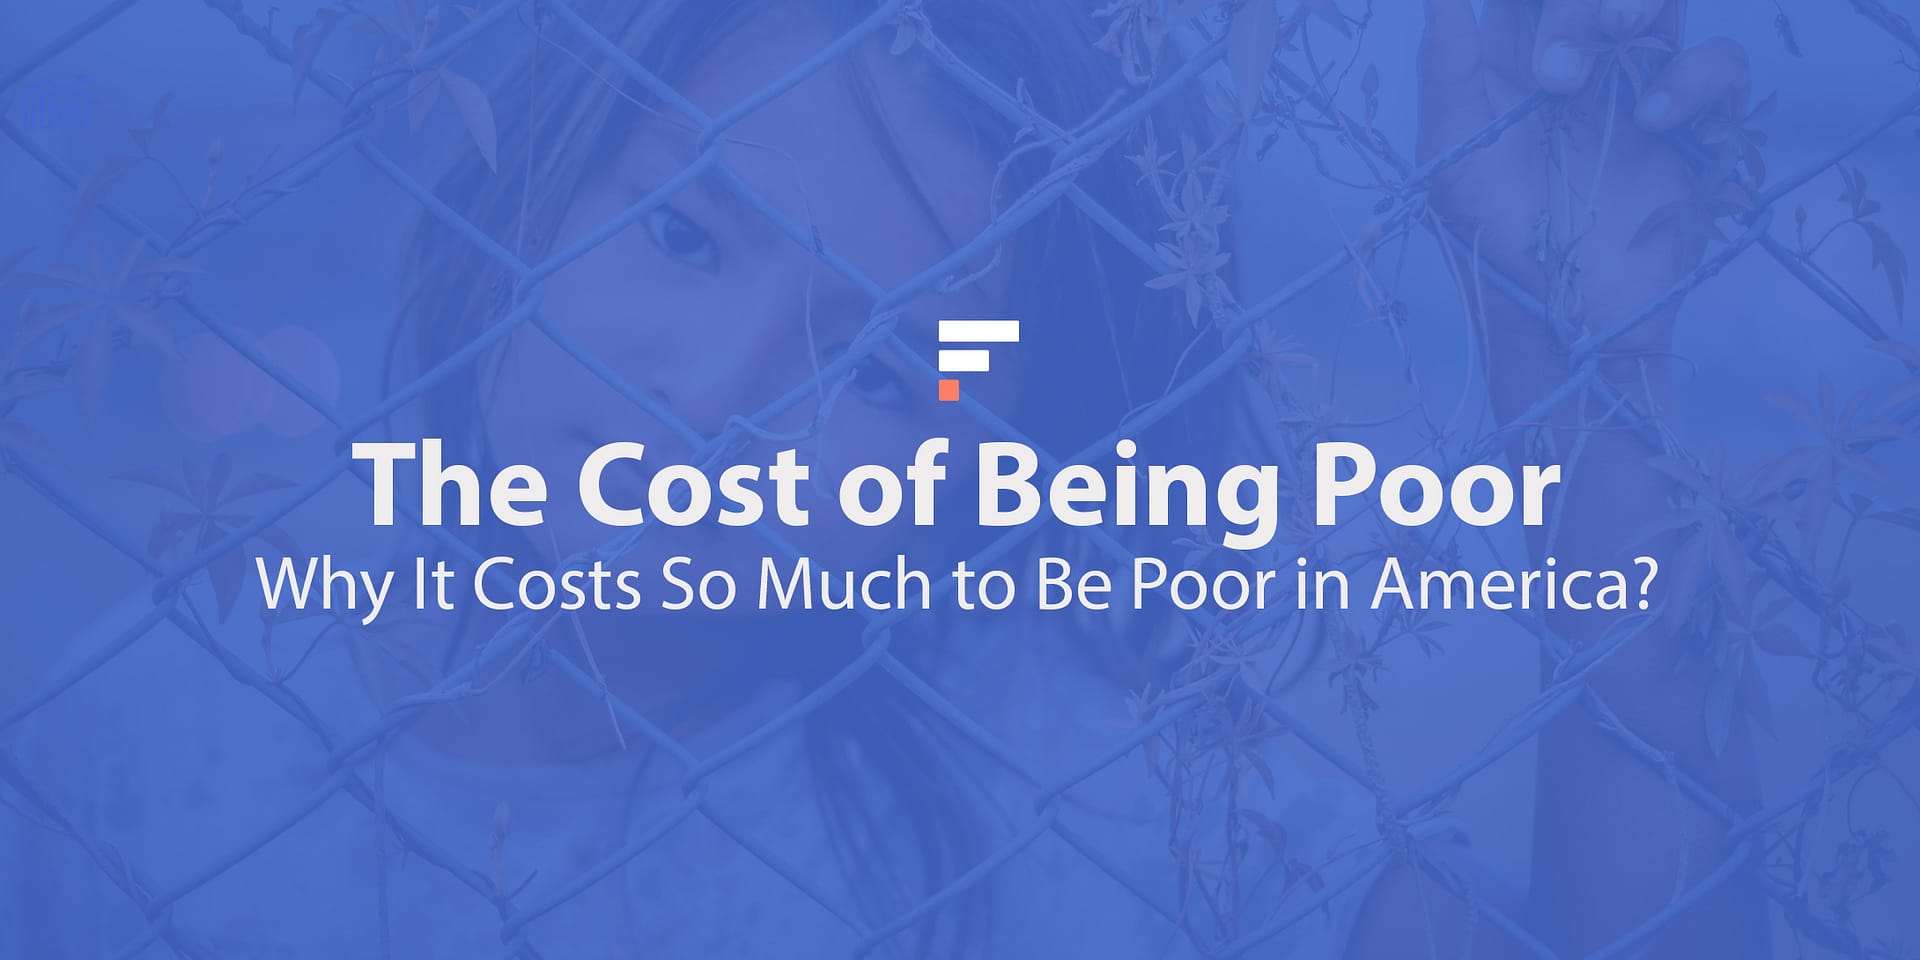 The Cost of Being Poor: Why It Costs So Much to Be Poor in America